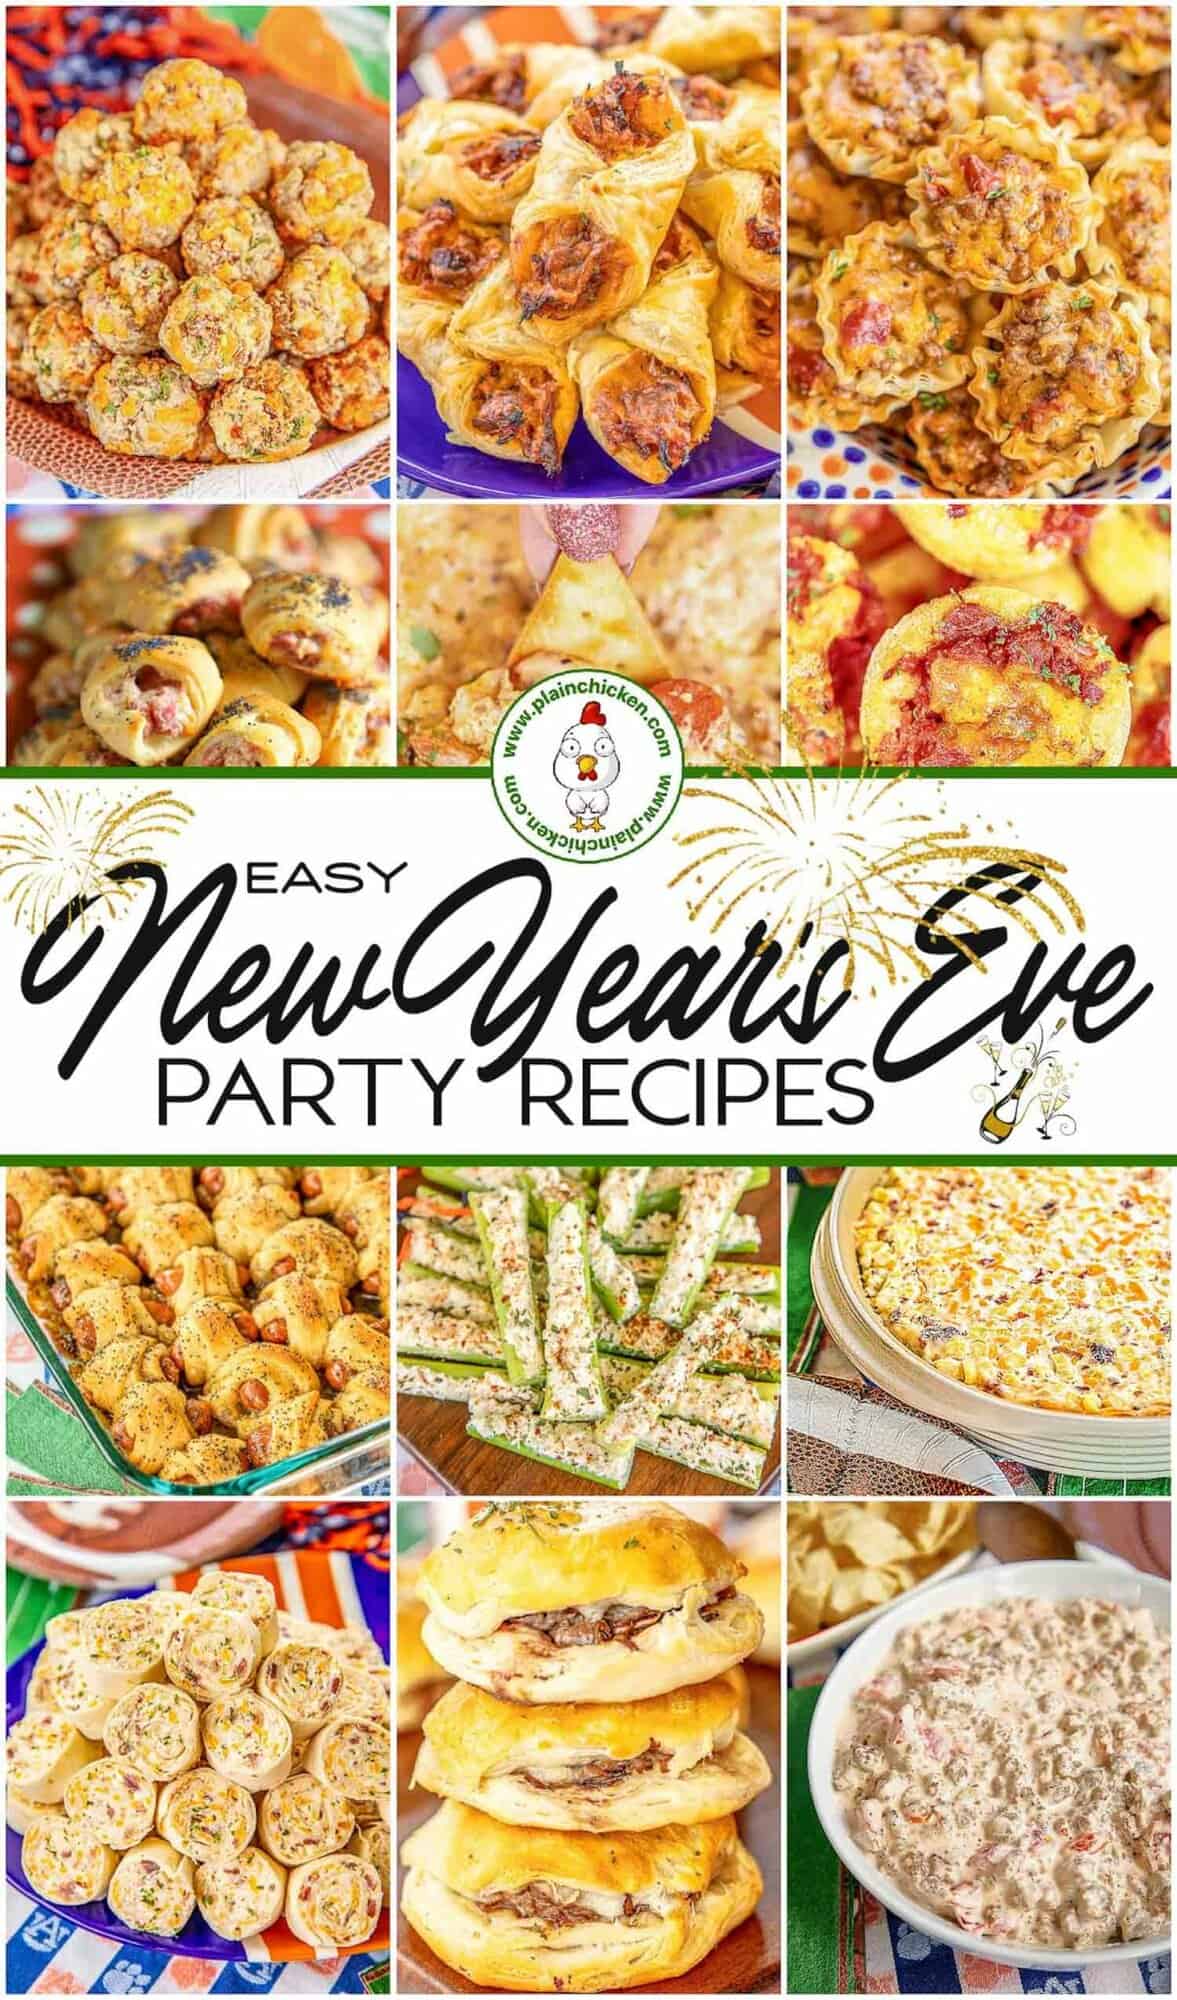 New Year's Eve Party Recipes - Plain Chicken